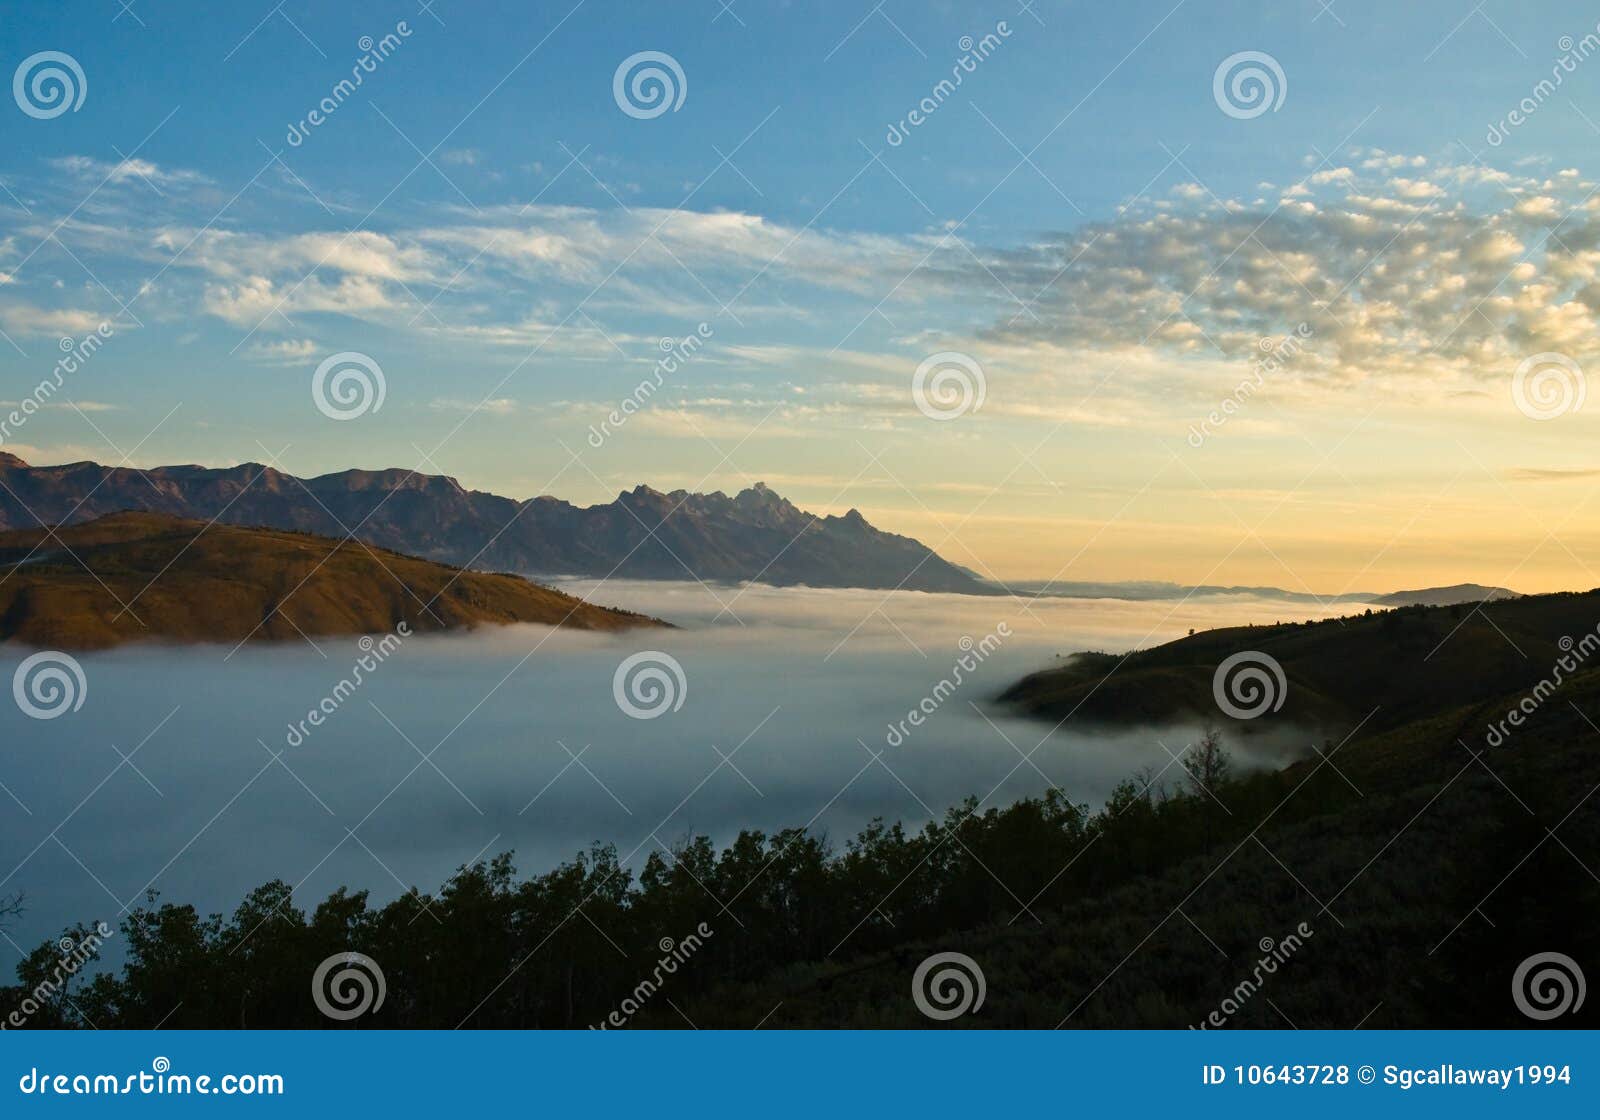 mountain range and a valley of fog at daybreak